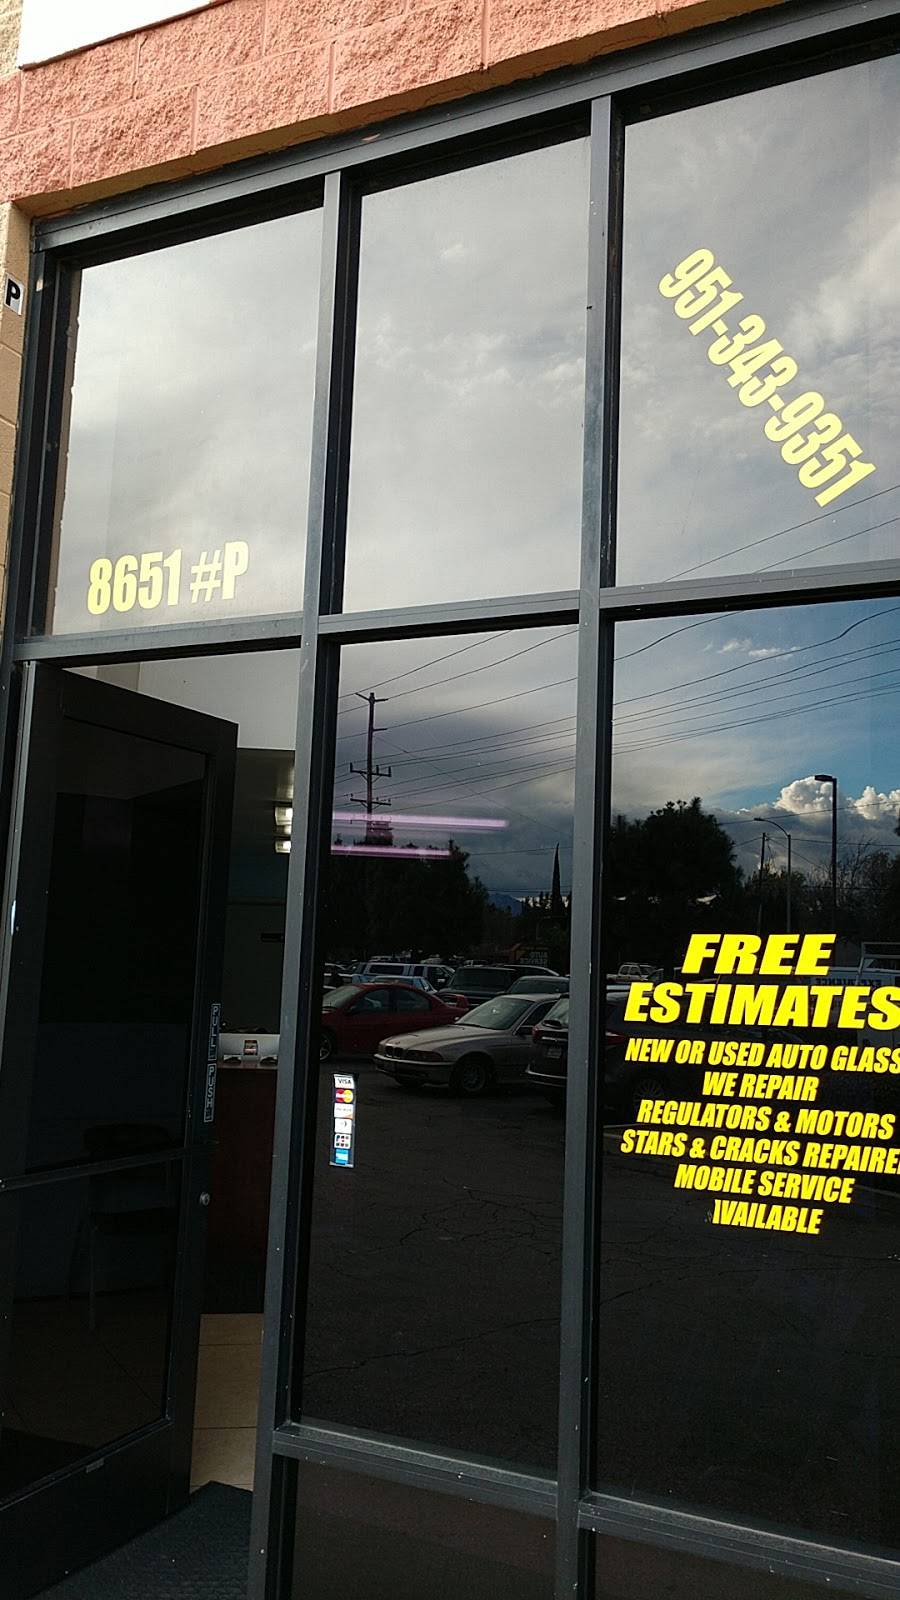 Super-Low Price Auto Glass | 8651 #P, Indiana Ave, Riverside, CA 92504 | Phone: (951) 343-9351